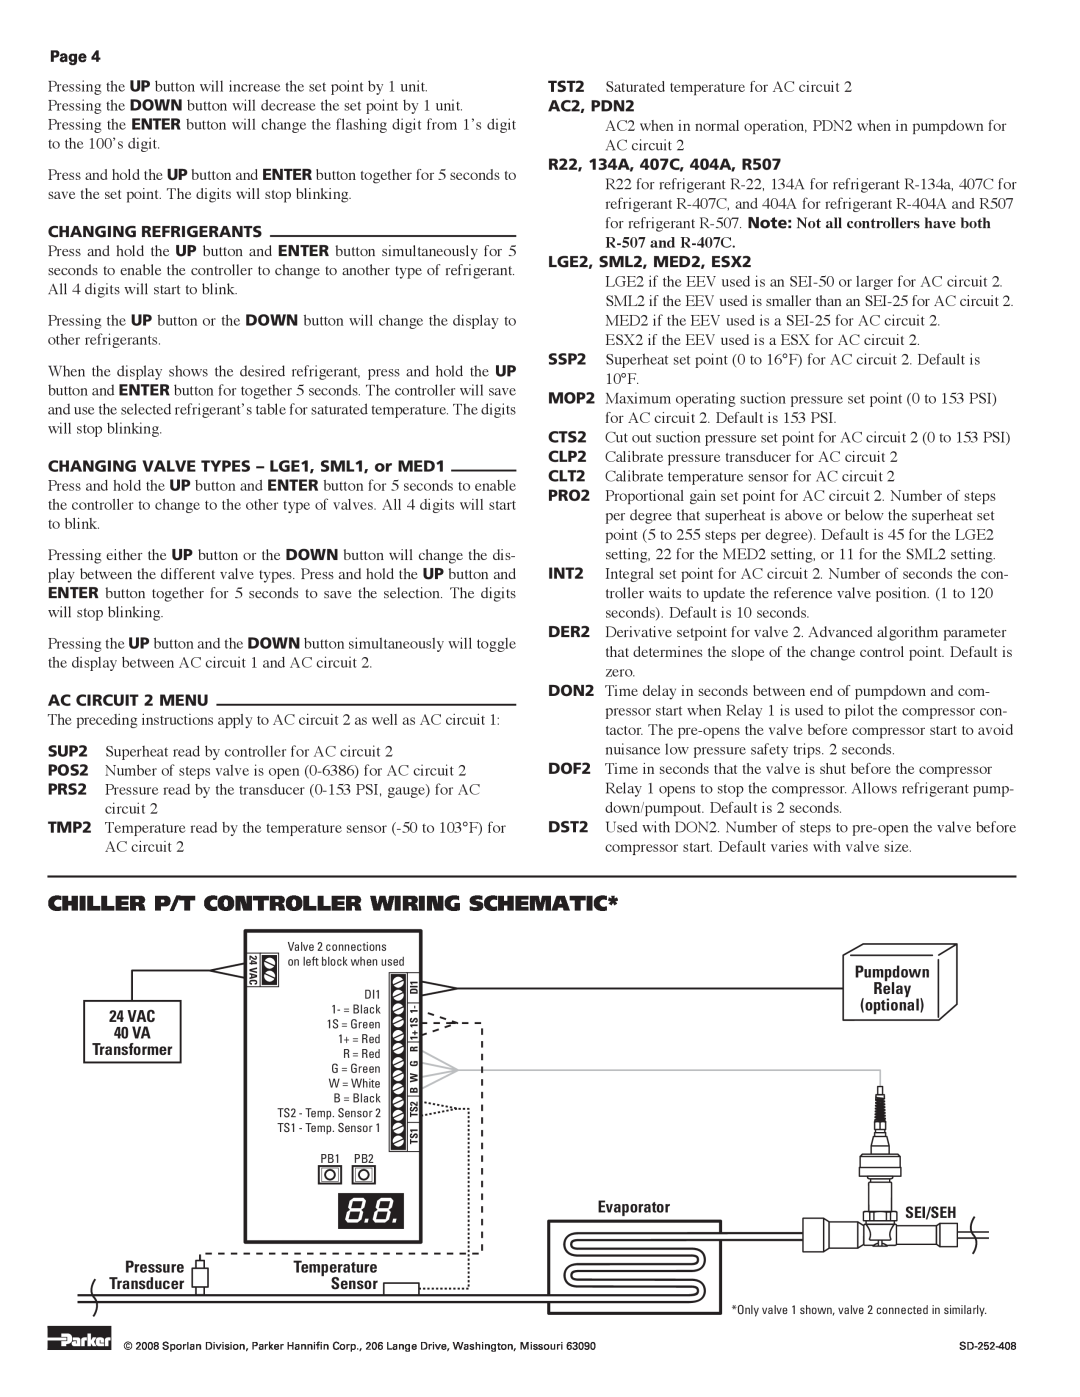 Parker Hannifin SEH-175, SEI-2, R-404A, R-134A, R-22 manual Chiller P/T Controller Wiring Schematic, R-507 and R-407C 